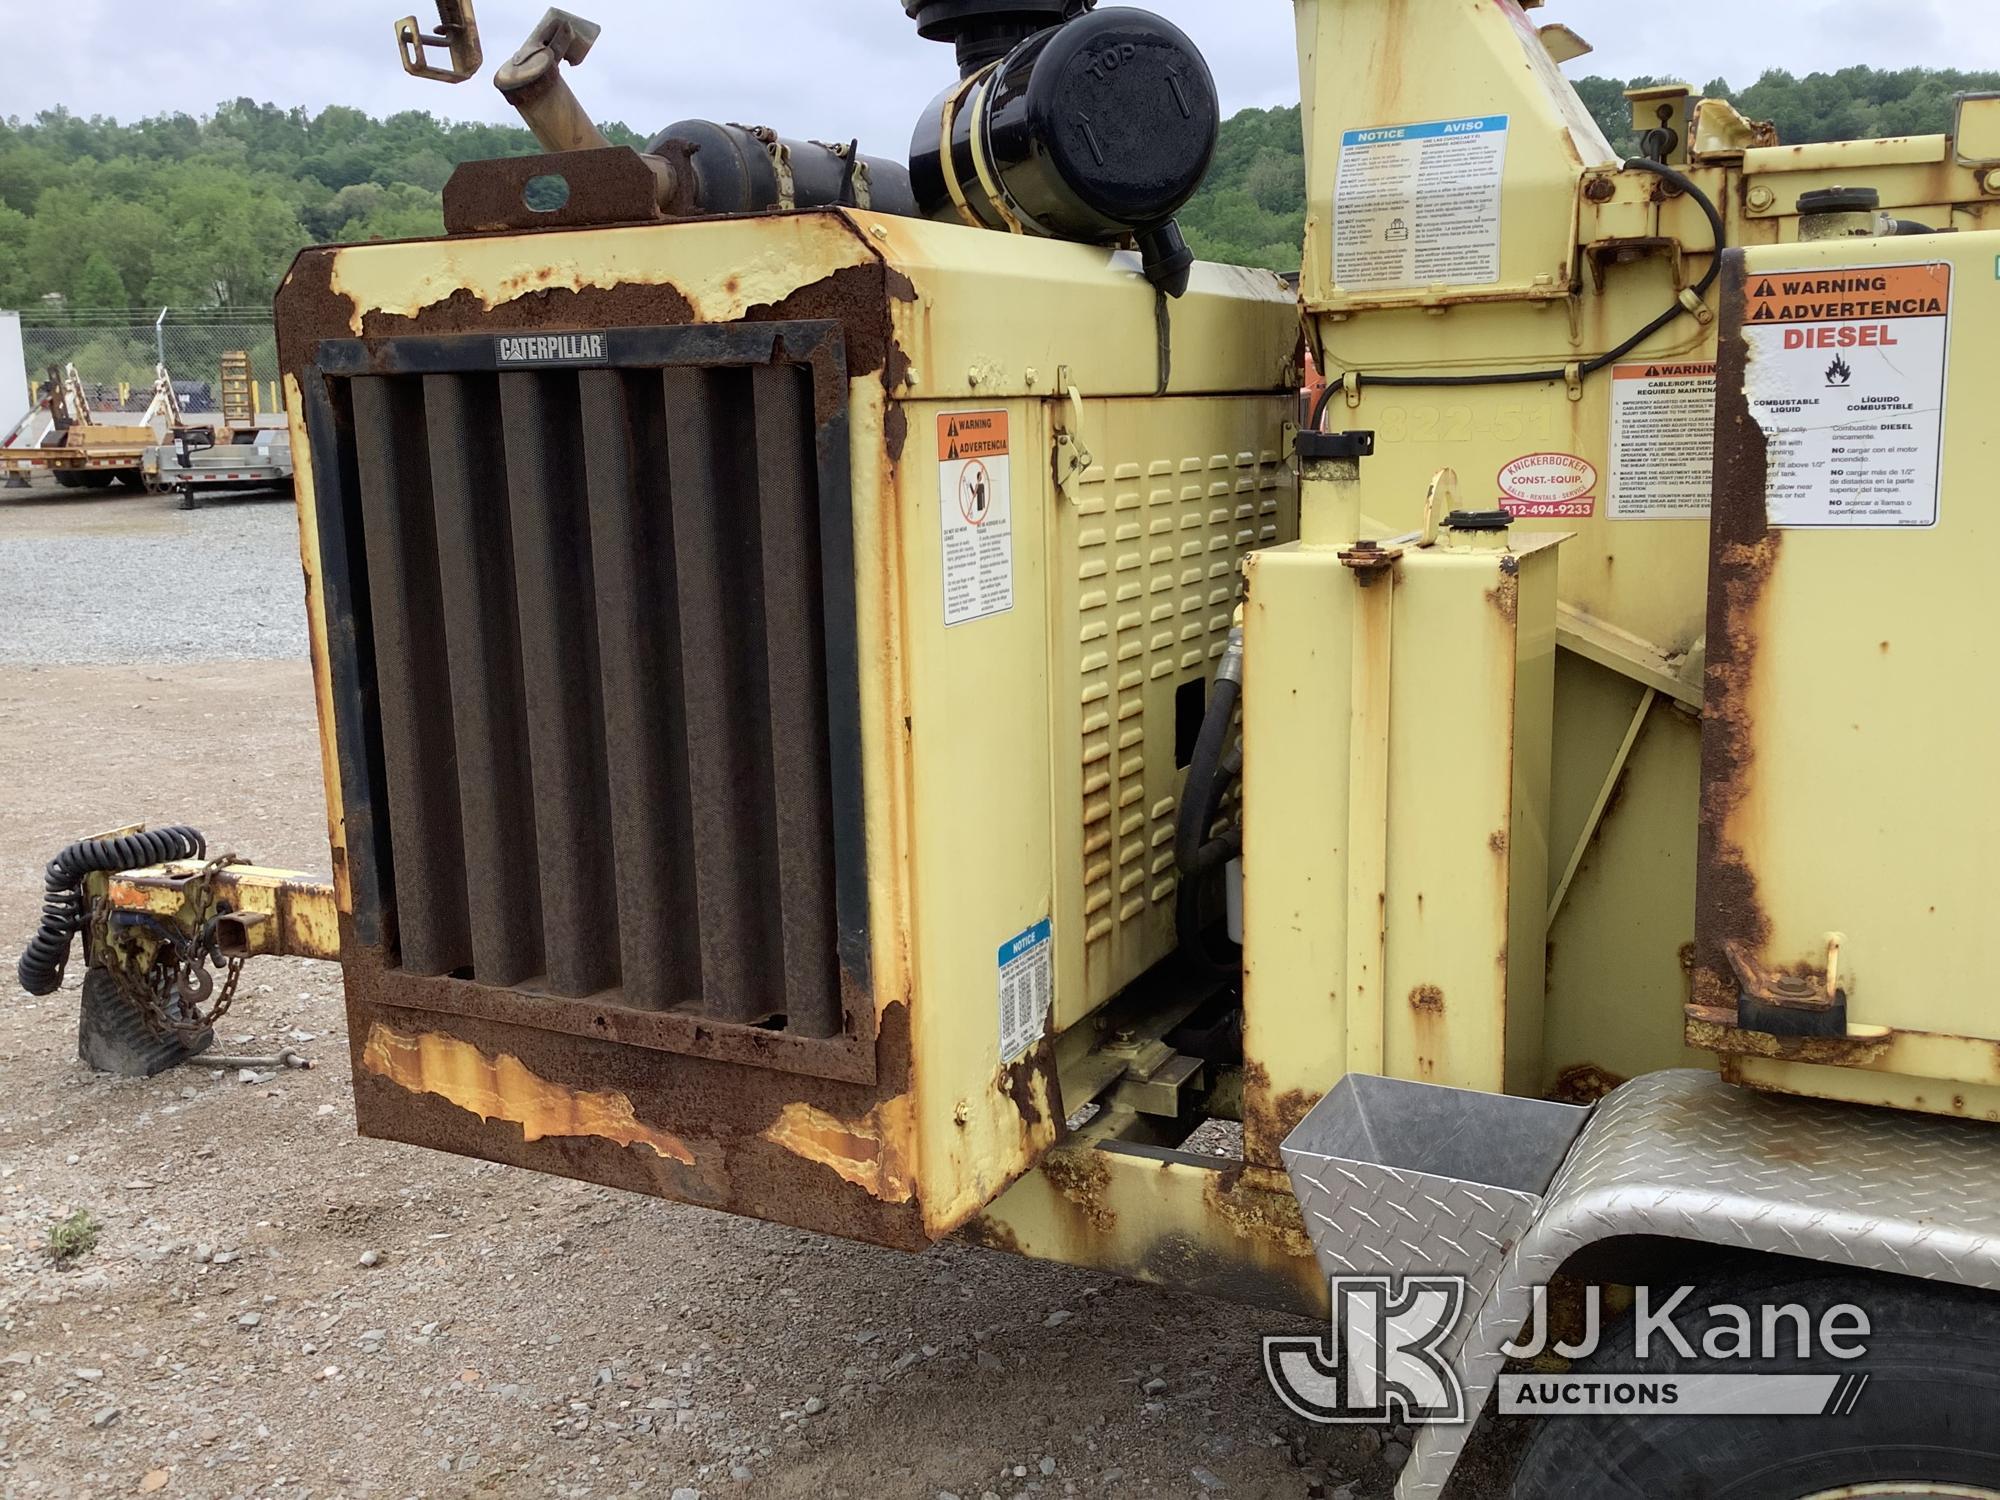 (Smock, PA) 2014 Bandit 1390 Portable Chipper (15in Drum) Runs, Operational Condition Unknown, No Ja